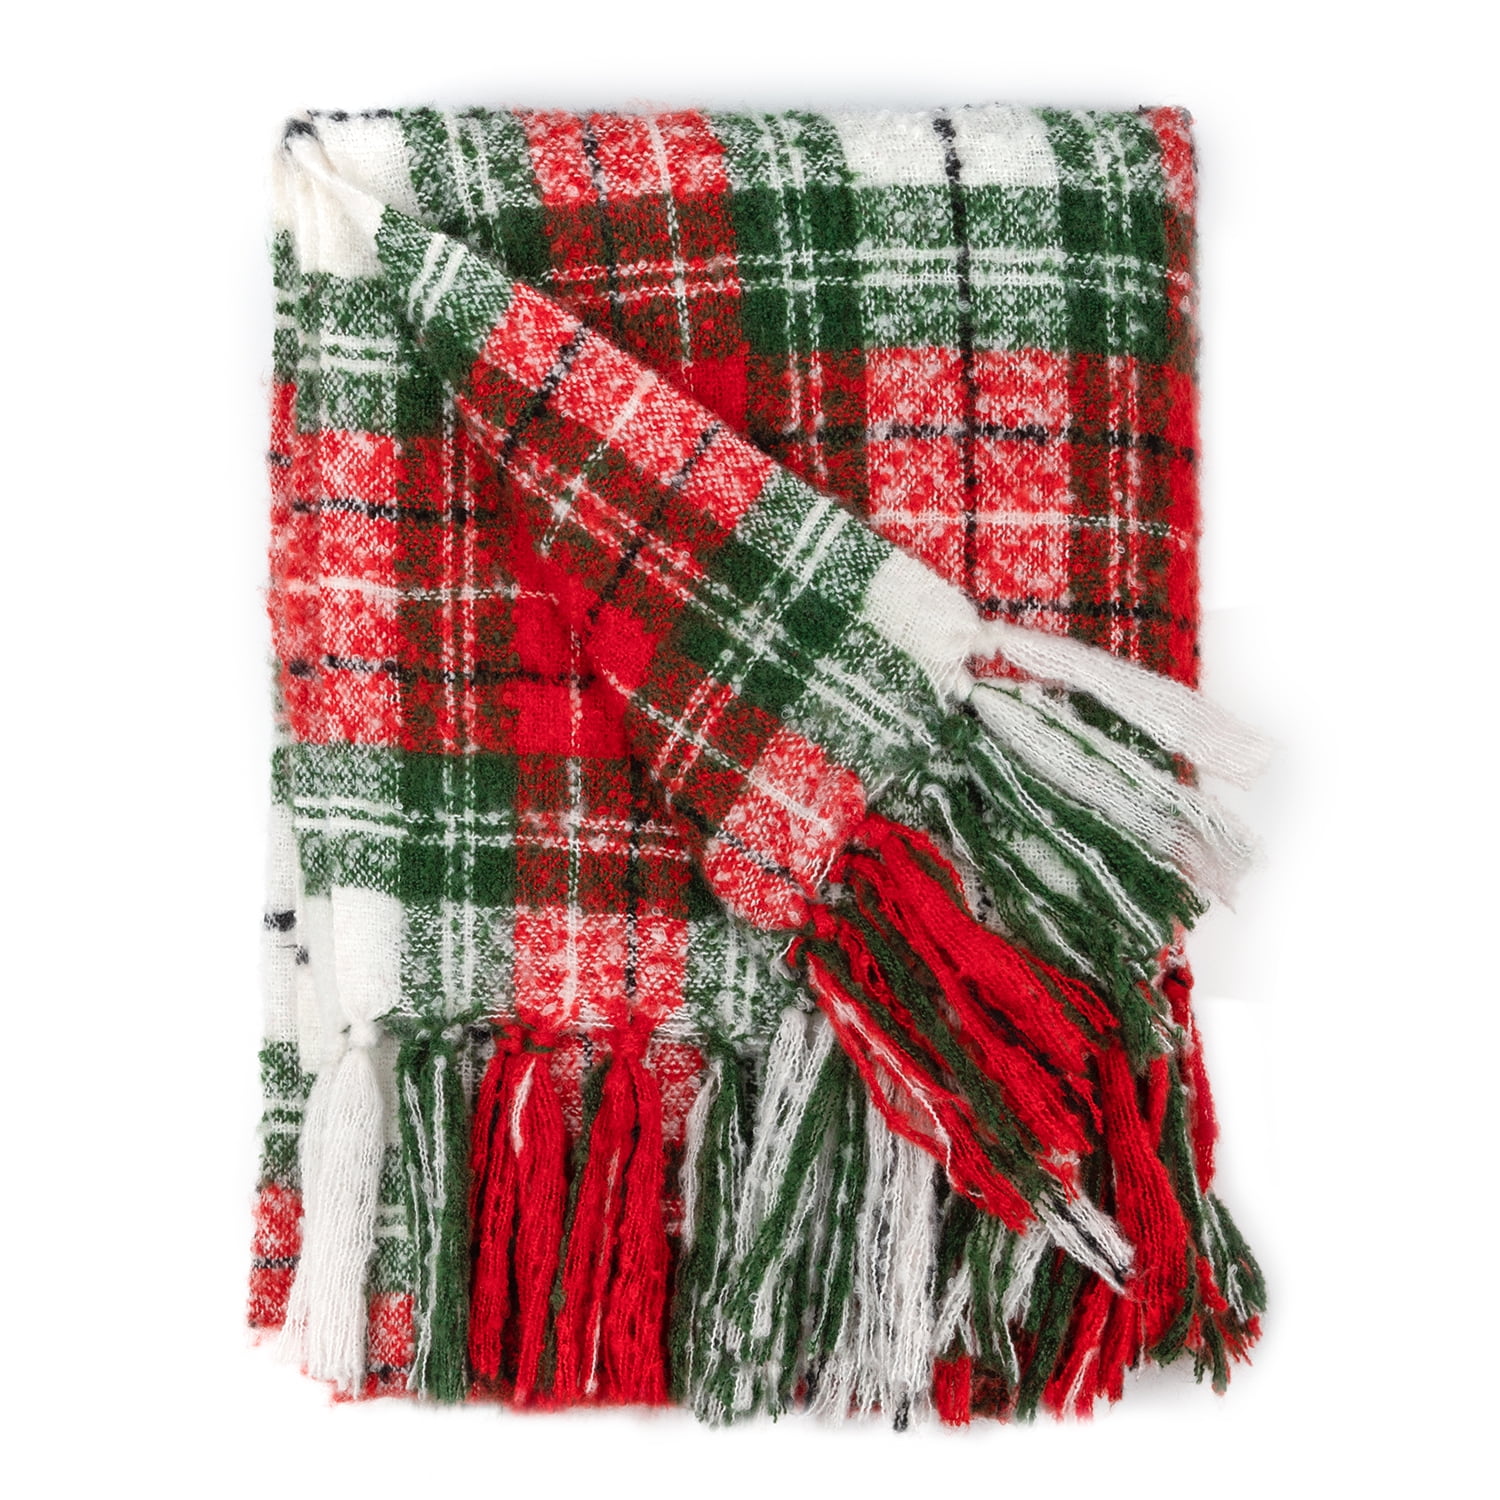 at Home Fringe 50 x 60 Red Throw